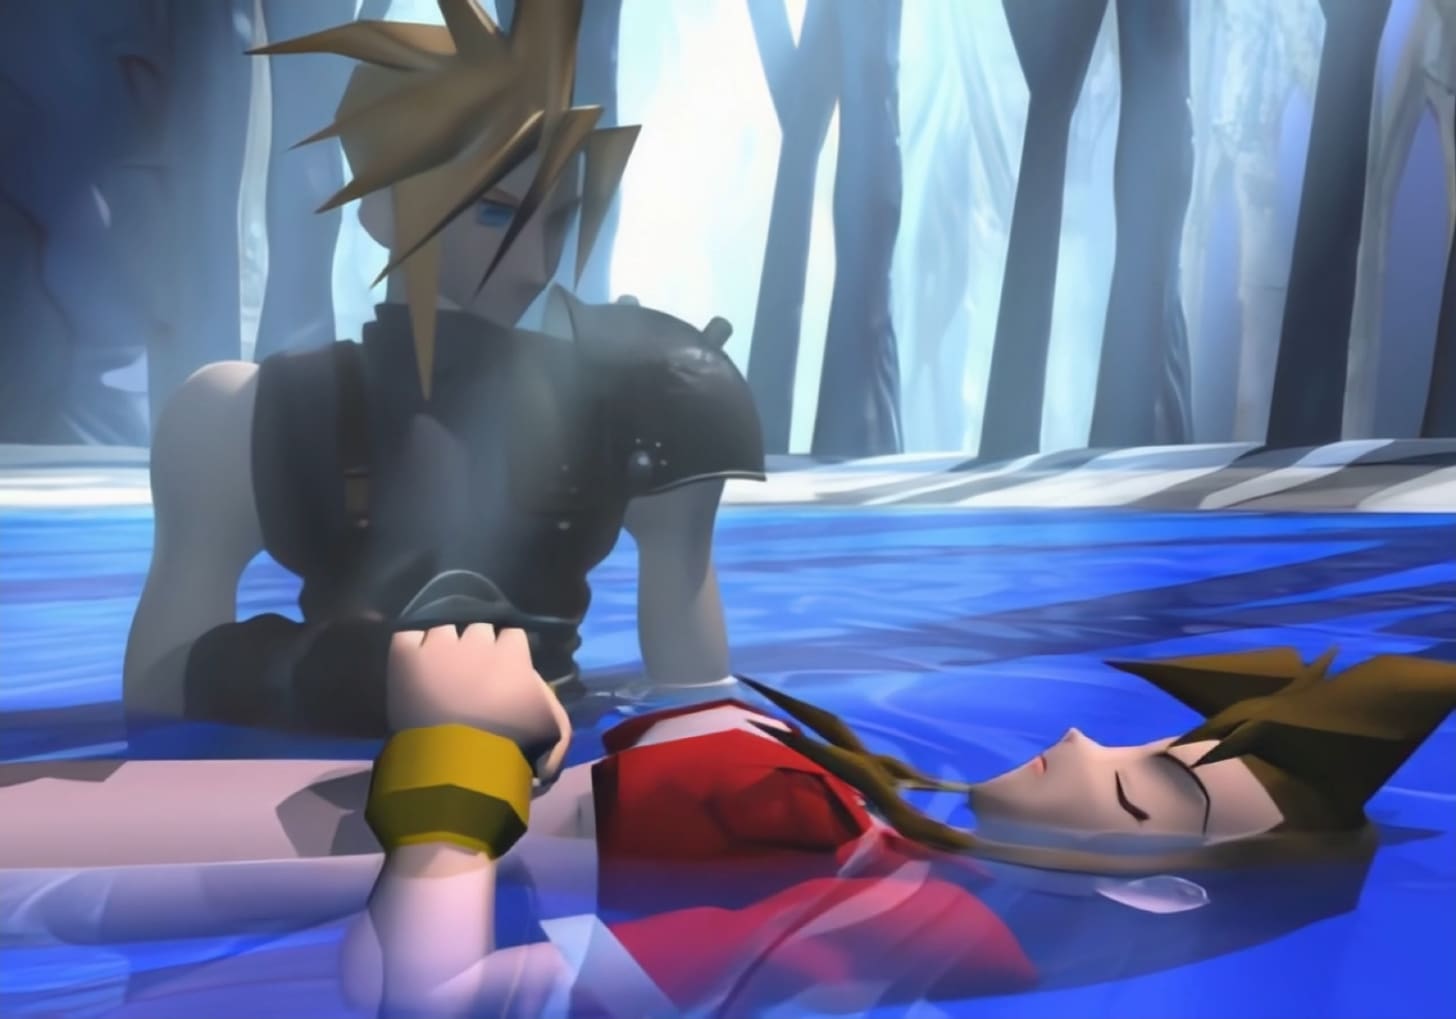 Cloud buries Aerith in the bottomless pond in the City of the Ancients.